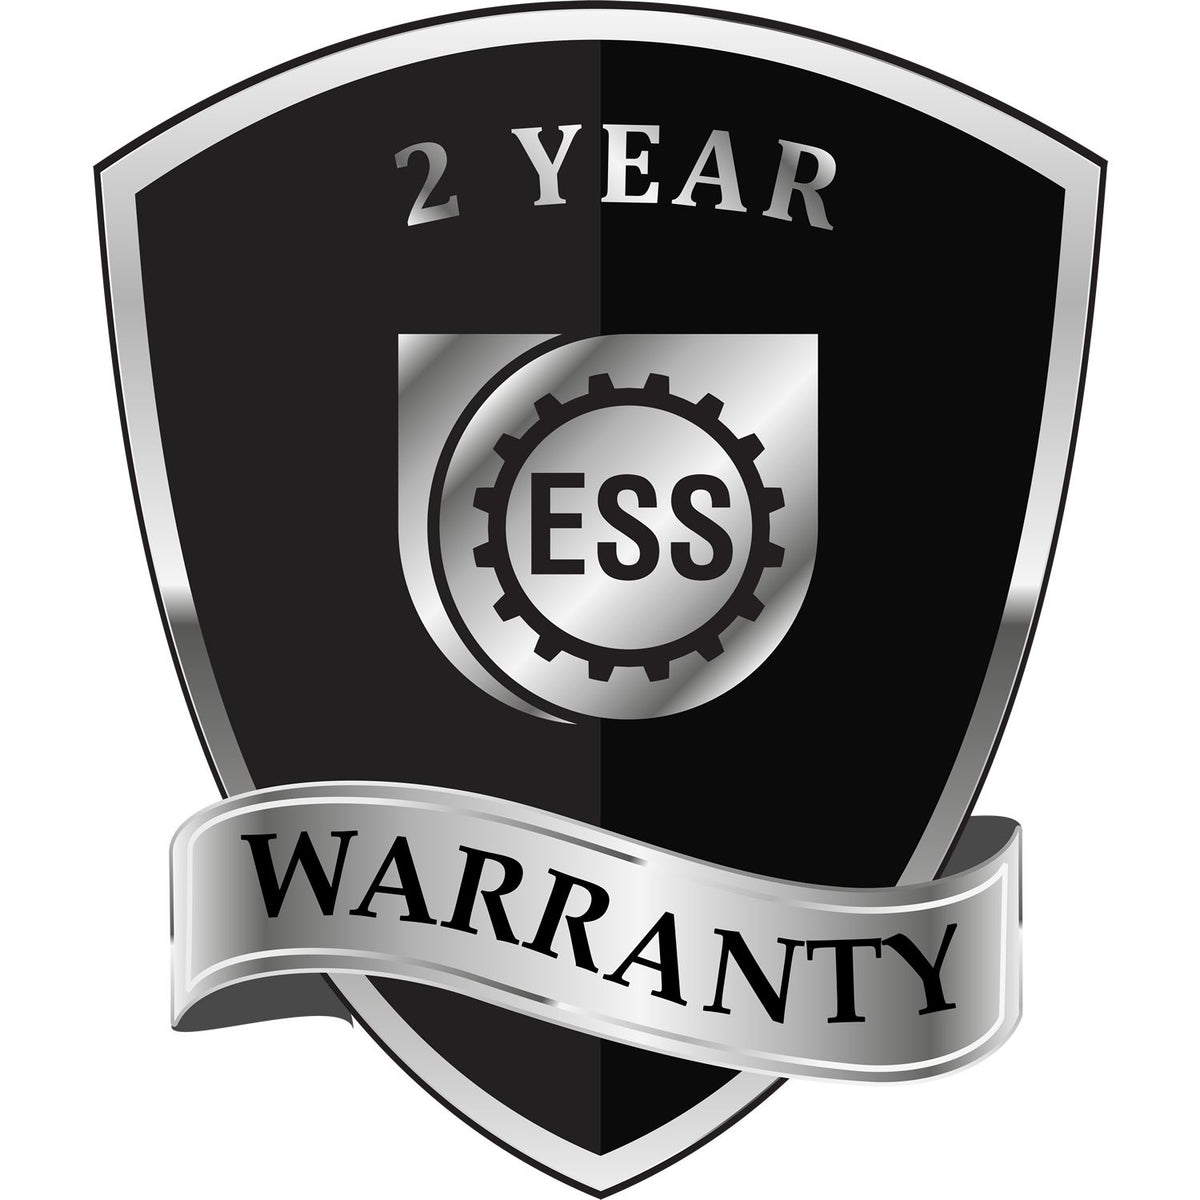 A black and silver badge or emblem showing warranty information for the Hybrid Washington Engineer Seal